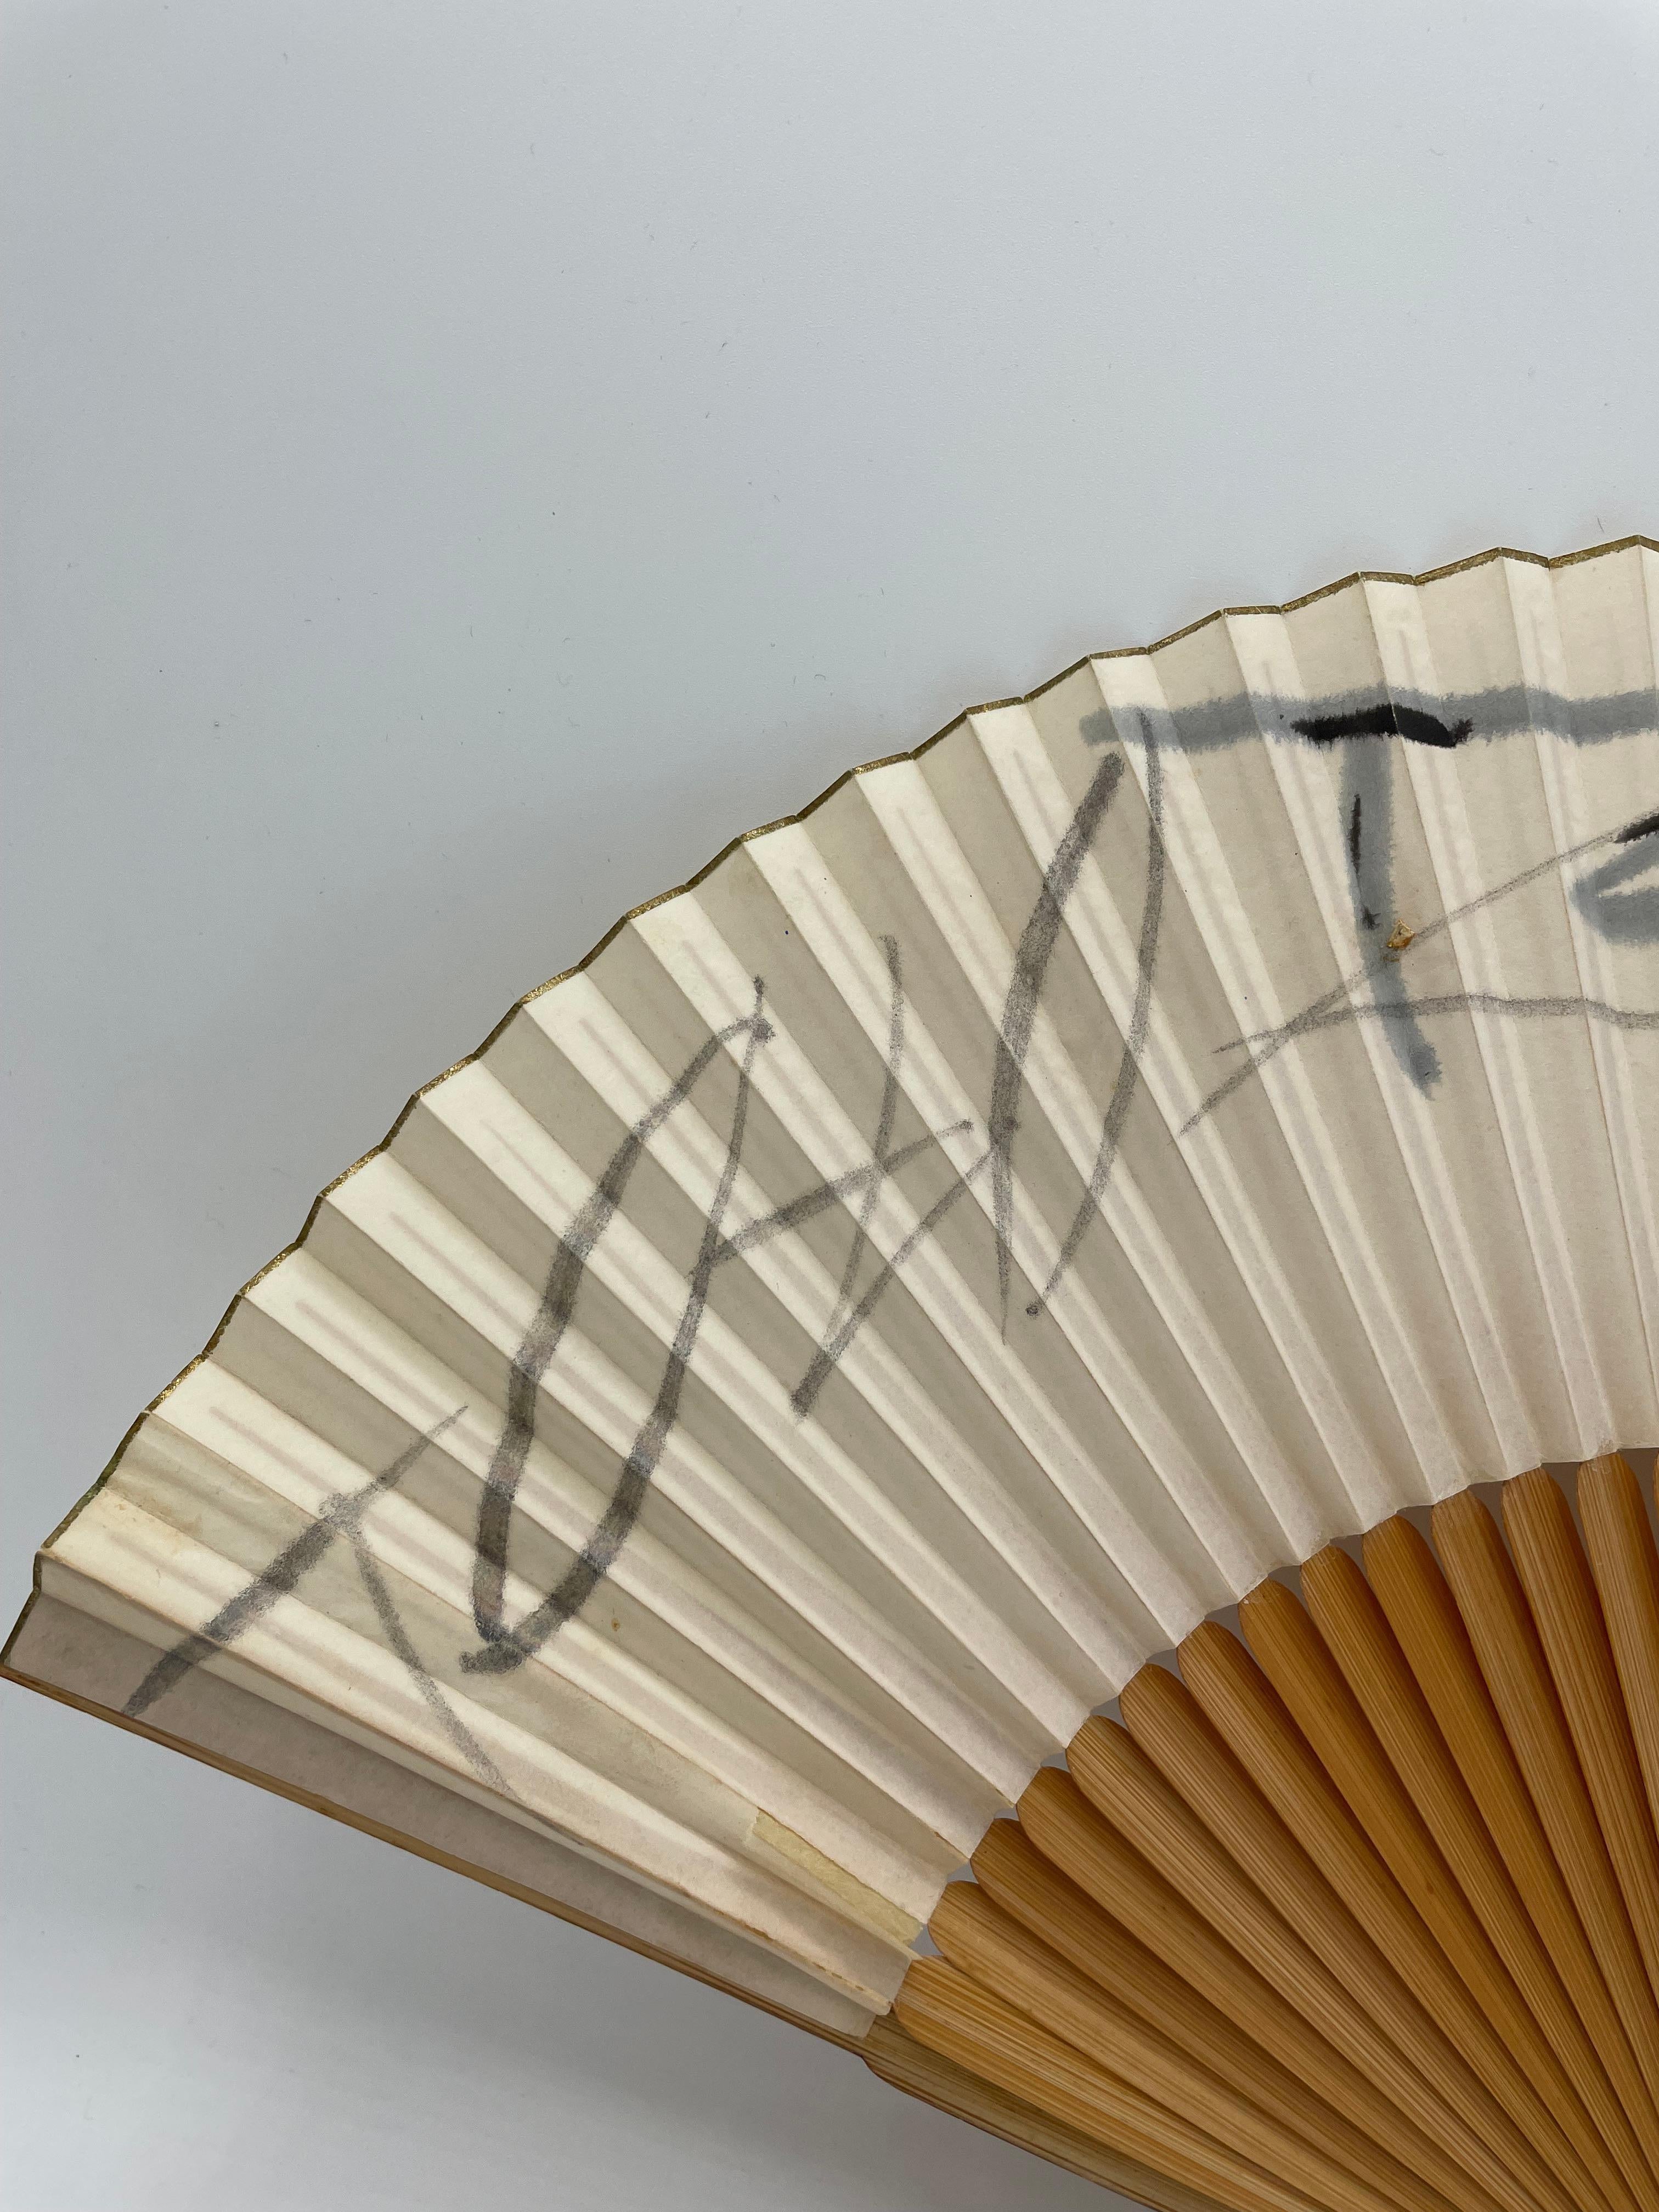 Late 20th Century Japanese Bamboo and Paper Fan Leaves Design 1980s For Sale